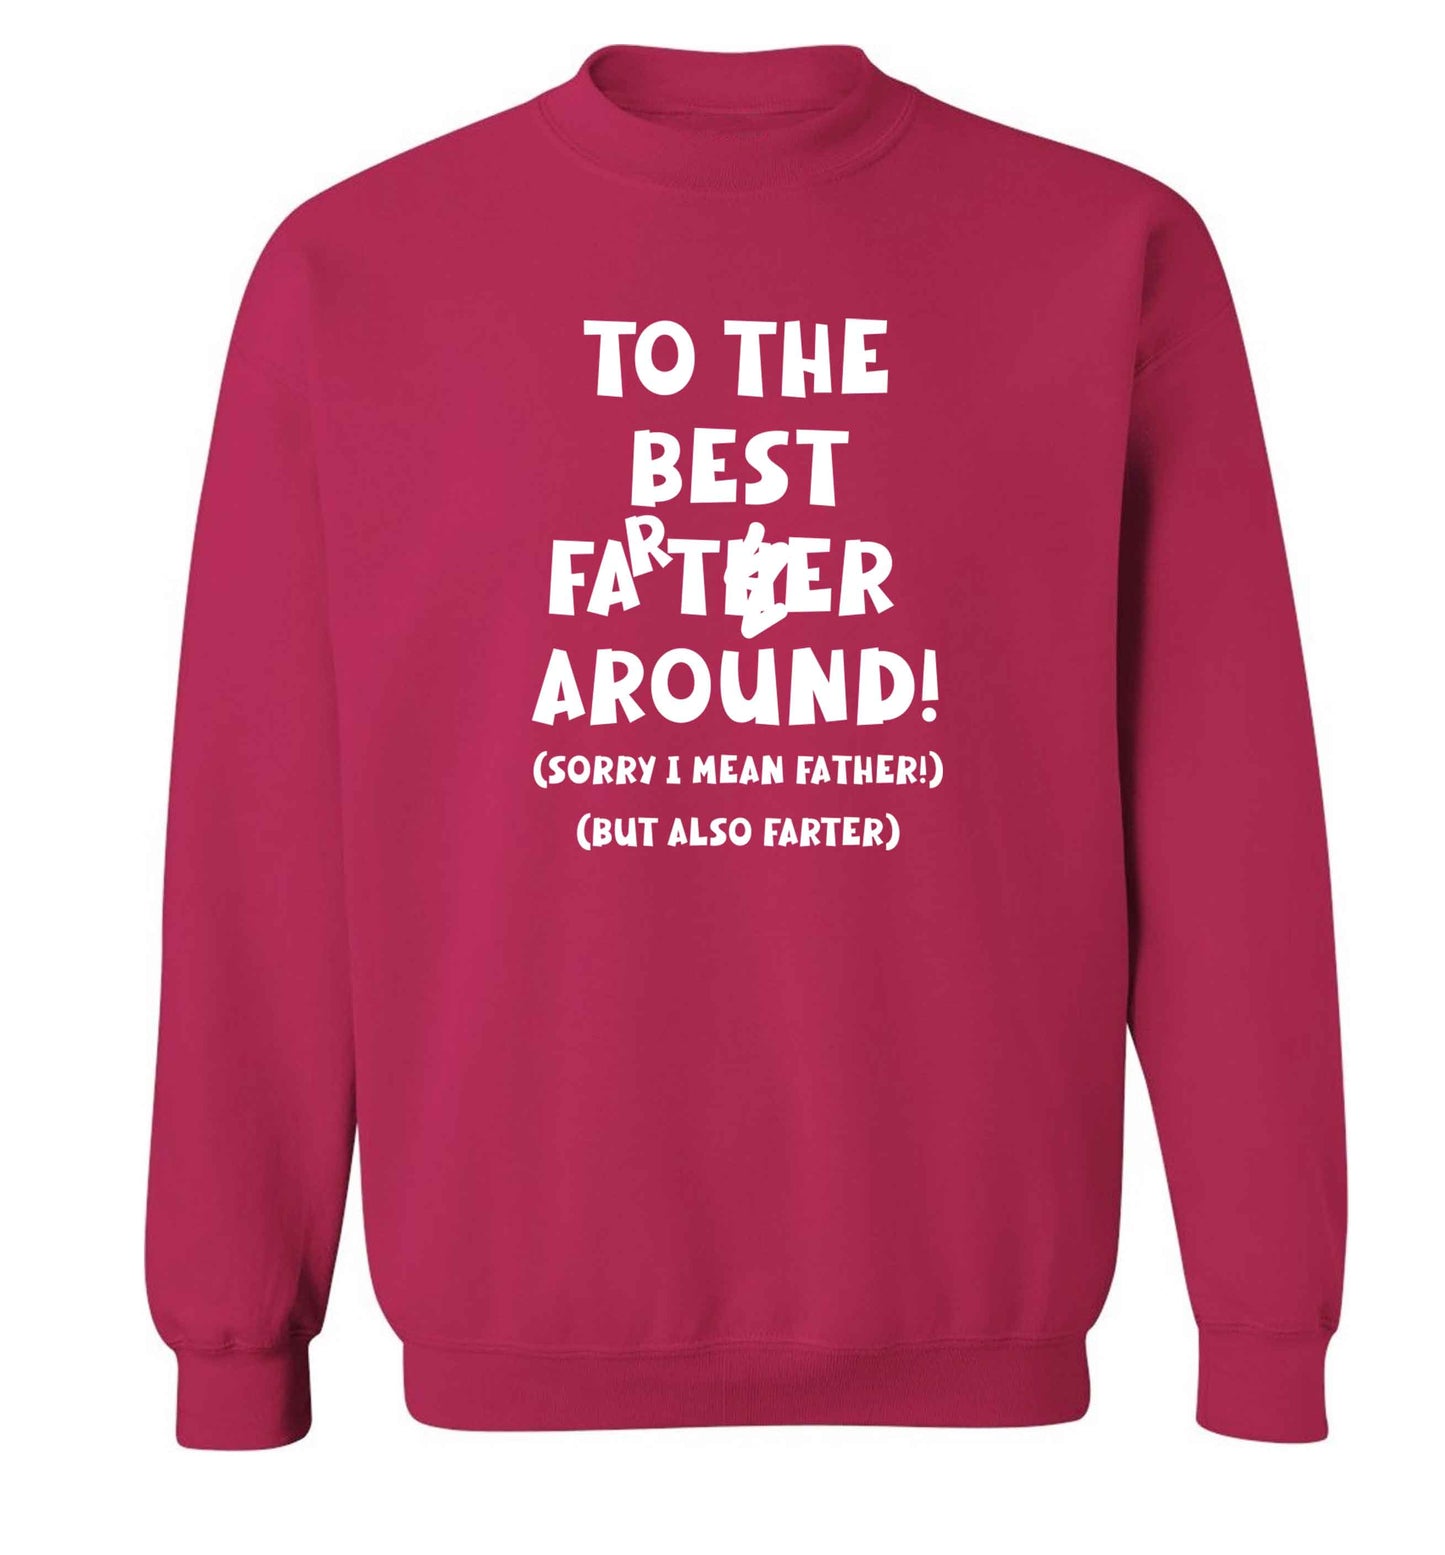 To the best farter around! Sorry I mean father, but also farter adult's unisex pink sweater 2XL